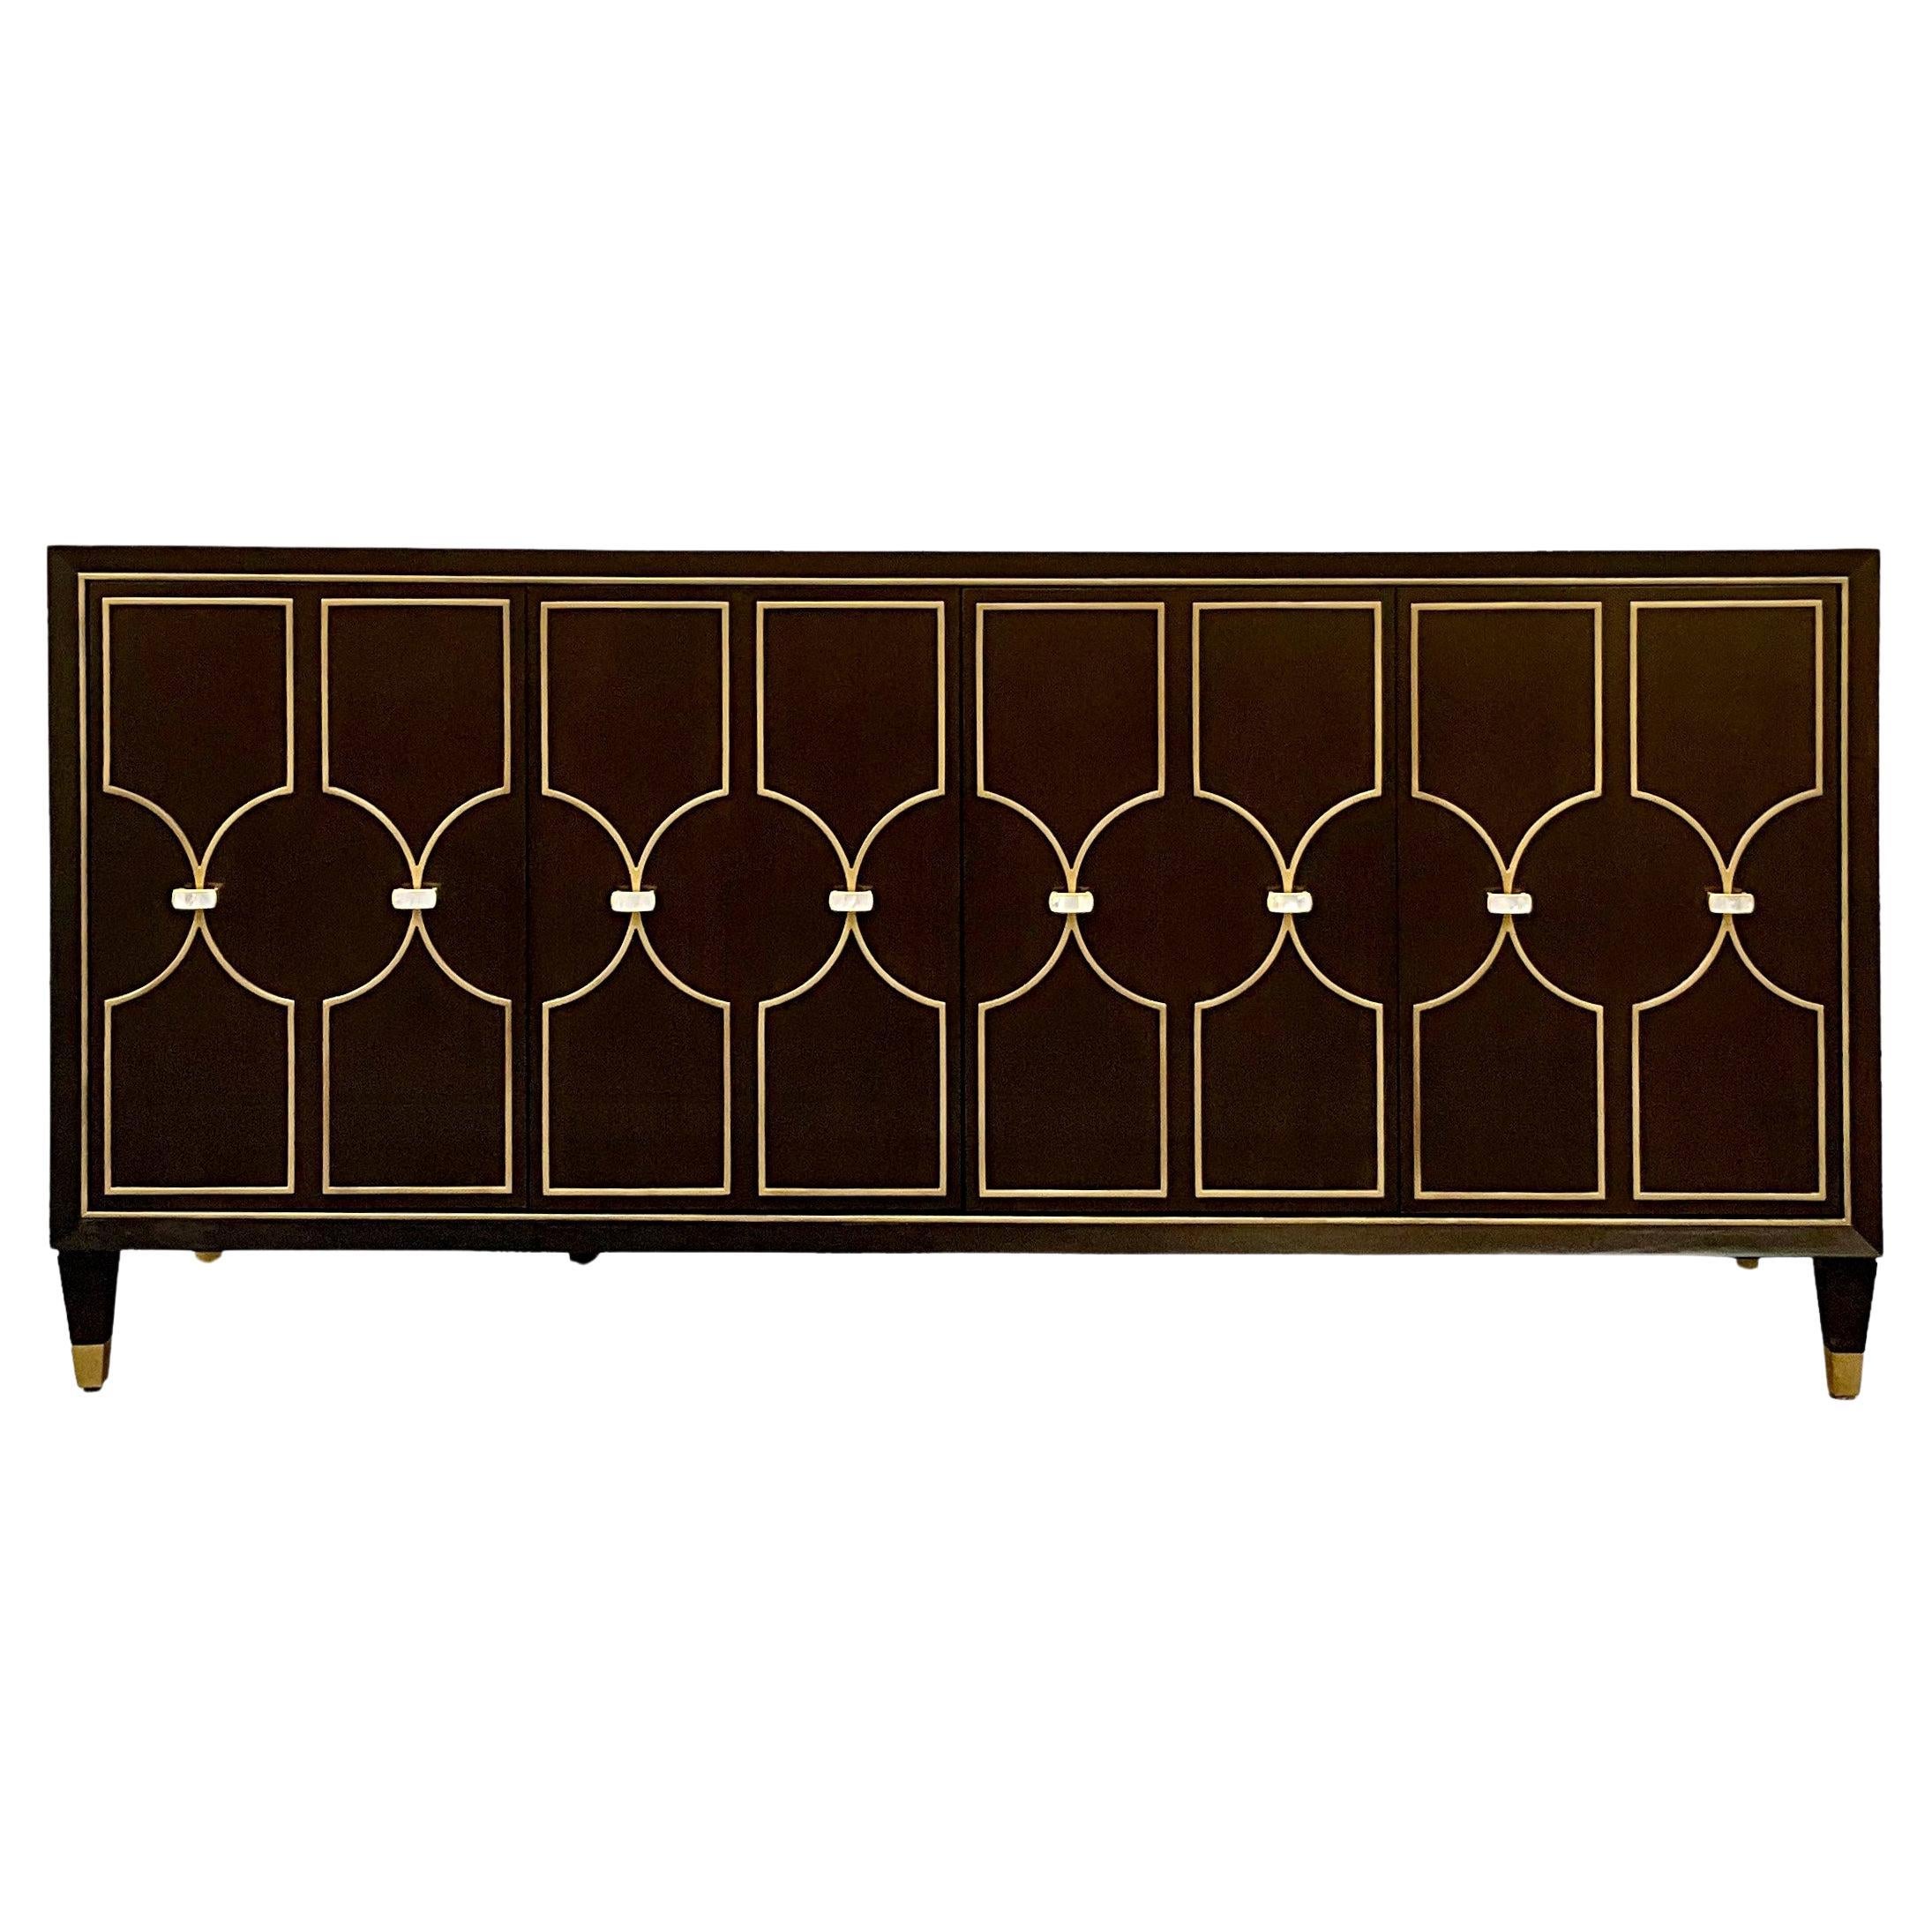 Modern Regency Style Carved Waknut Credenza / Sideboard By Lexington  For Sale